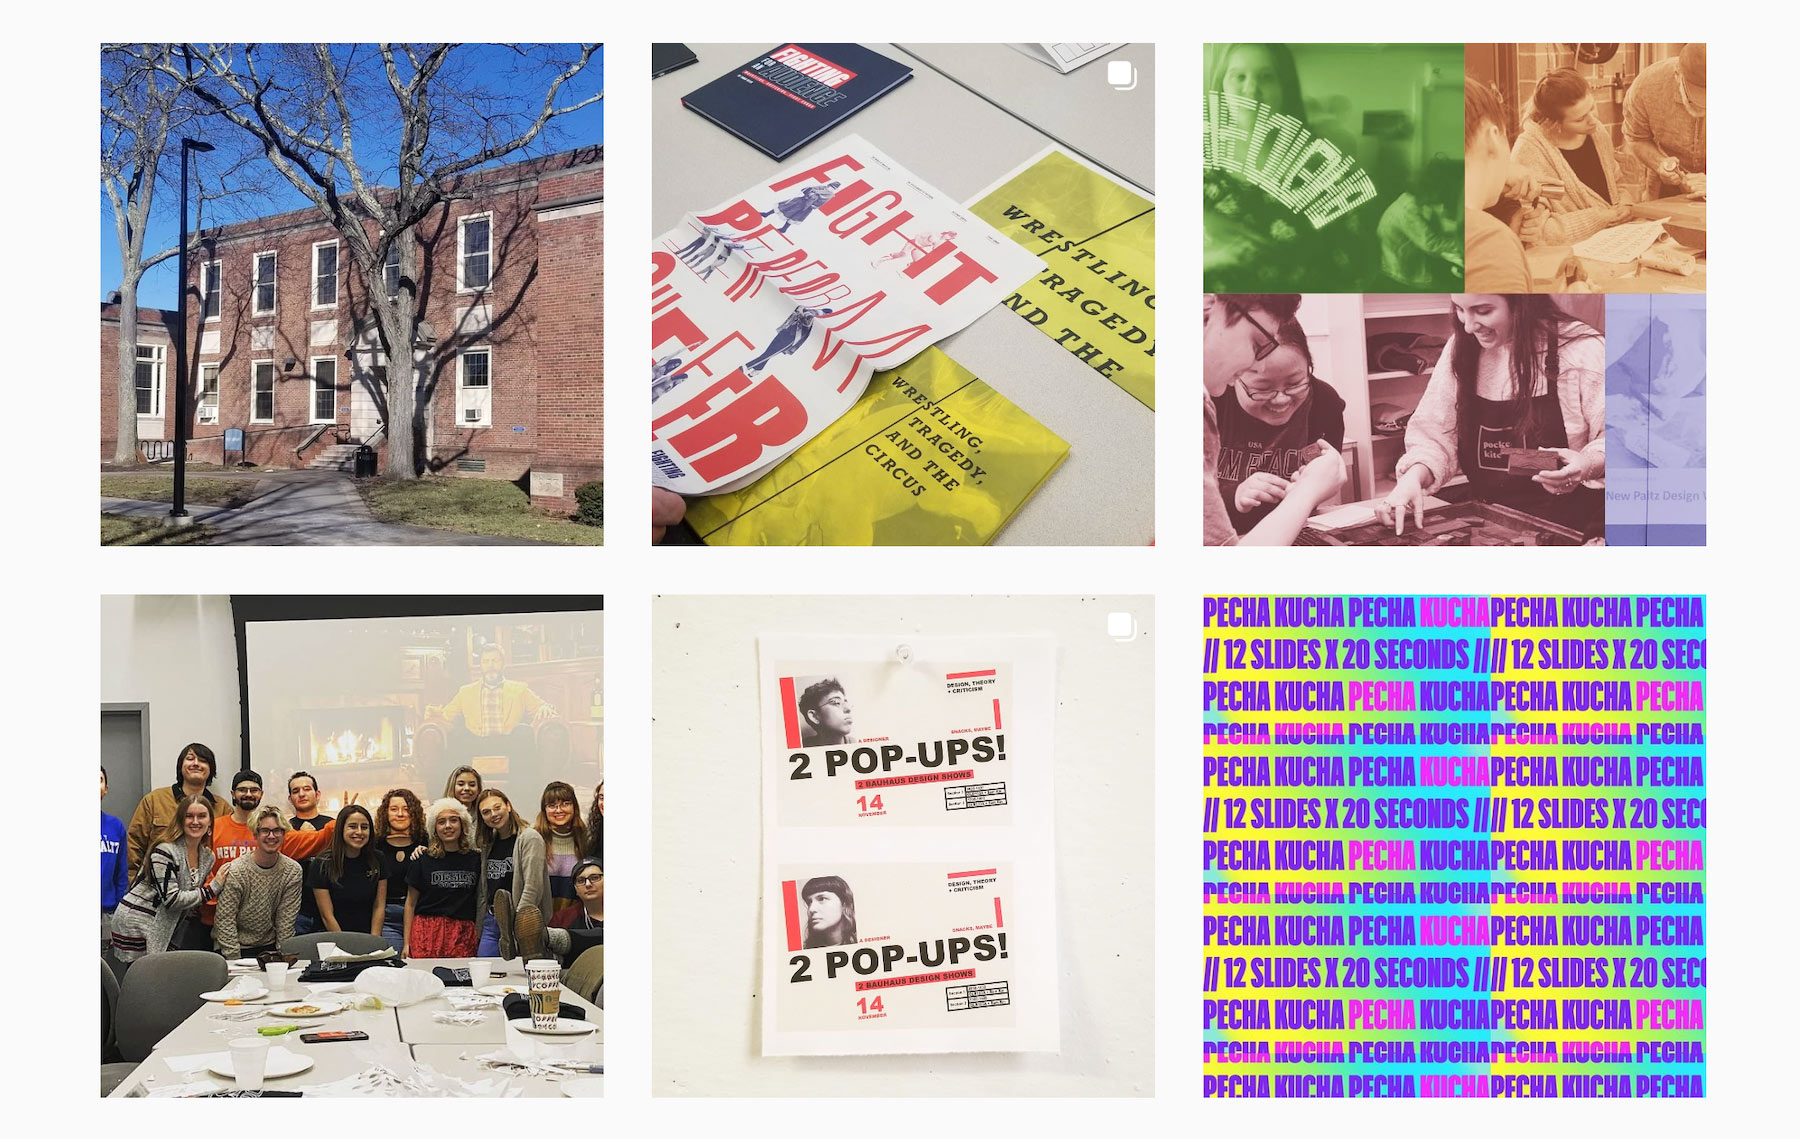 grid of images including the front of a brick building, images of printed publications, a group of students smiling, promotional posters